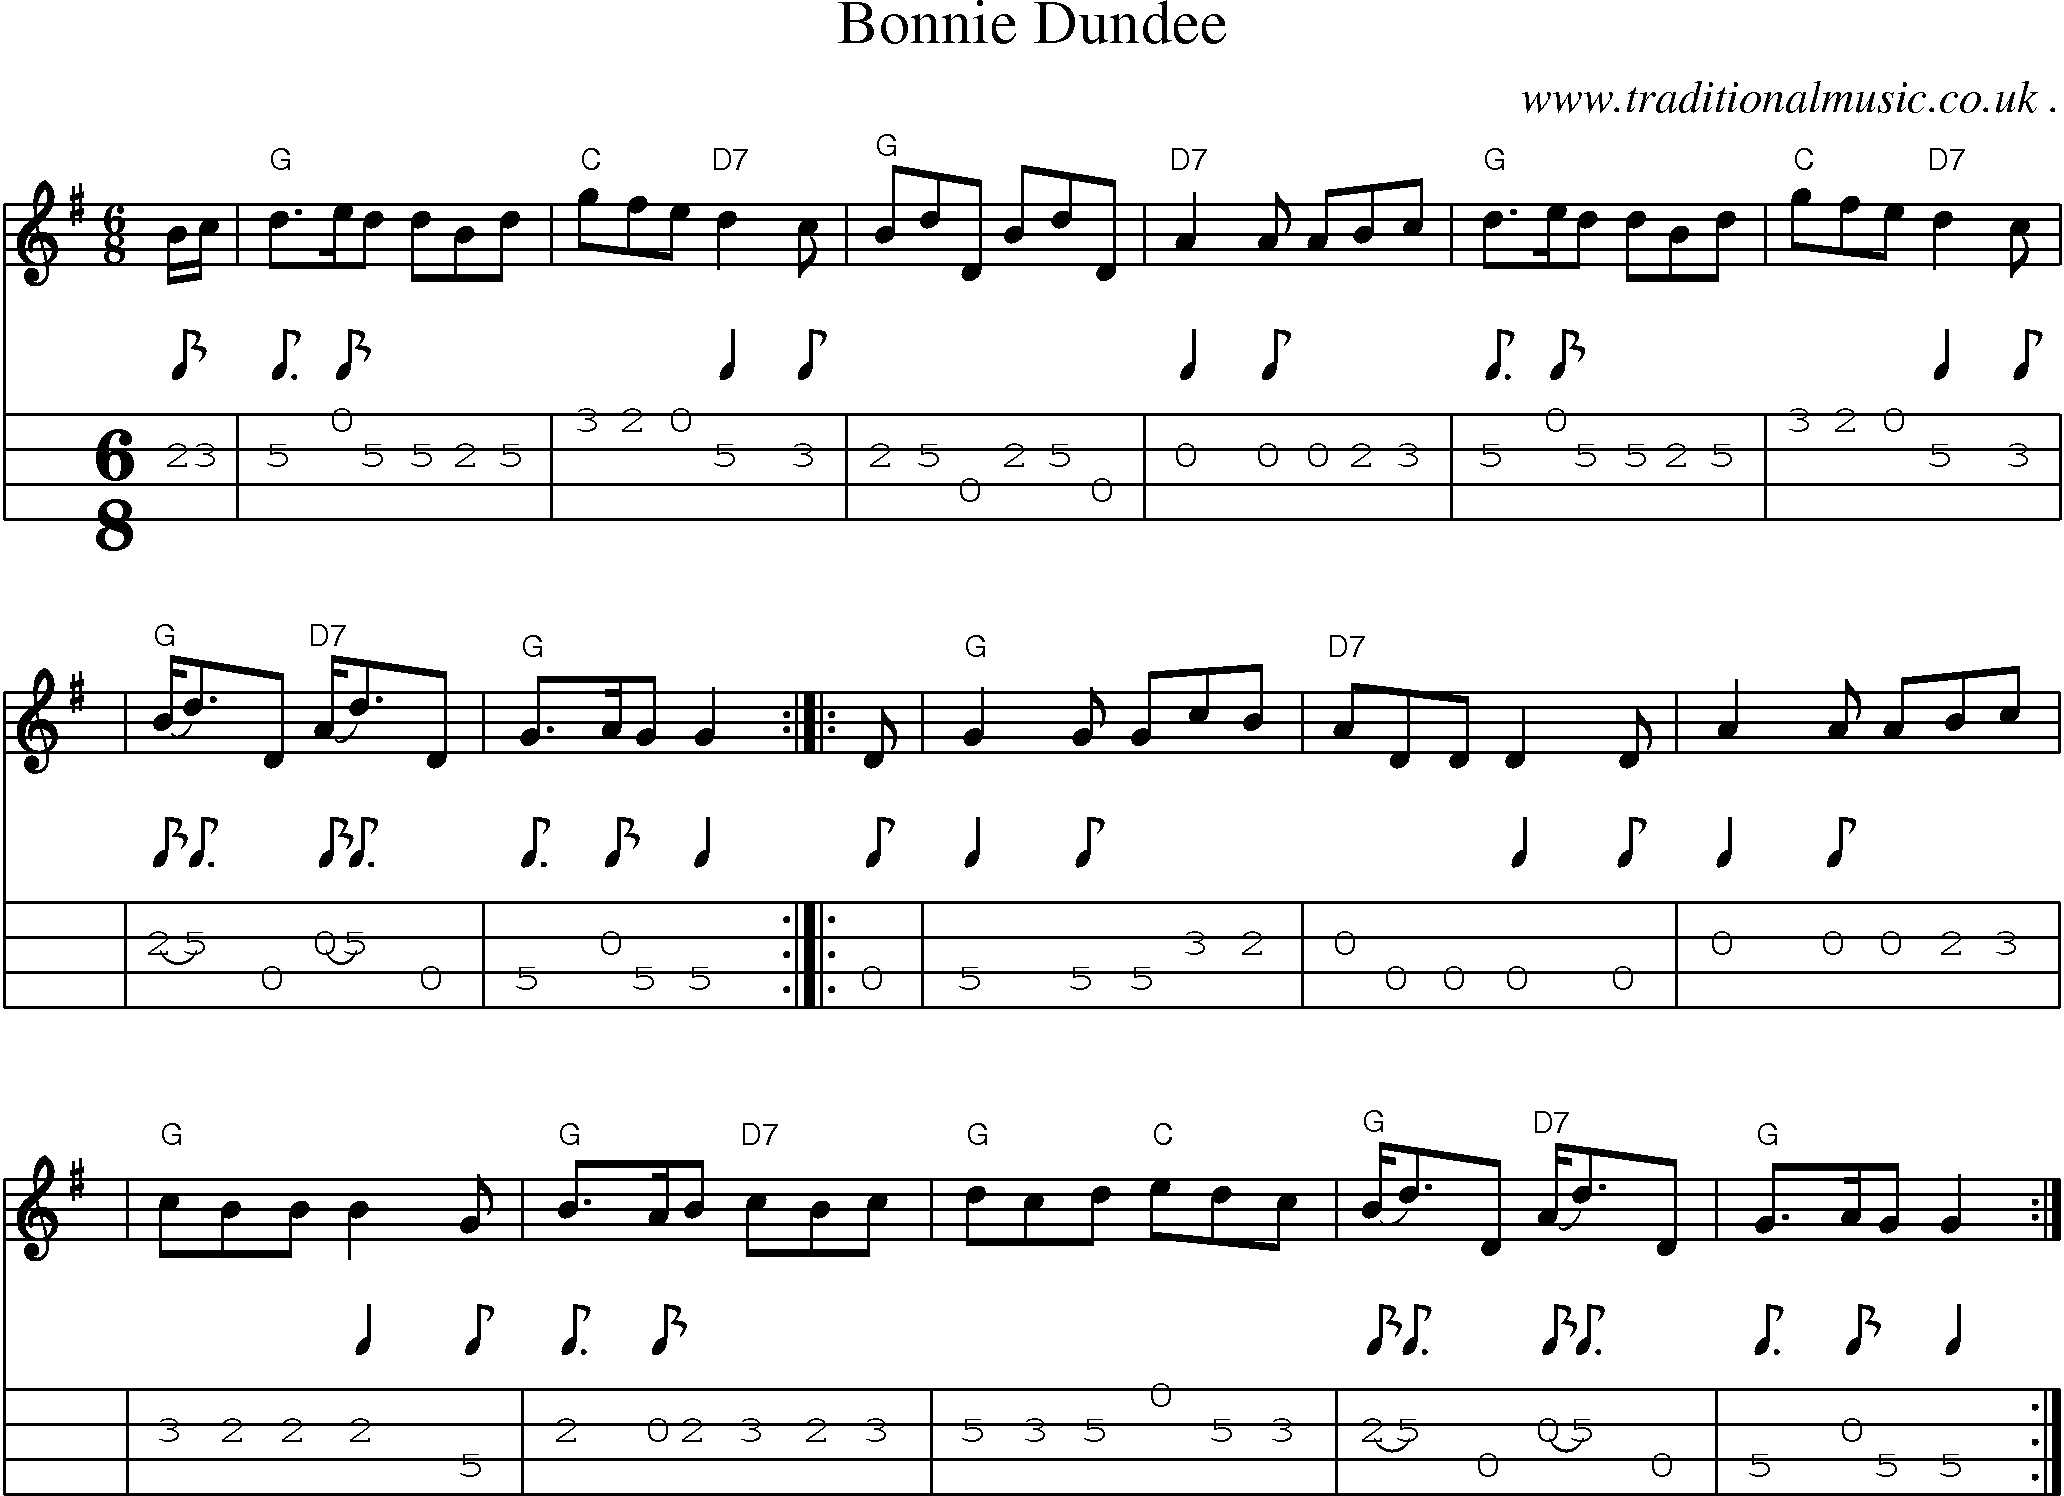 Sheet-music  score, Chords and Mandolin Tabs for Bonnie Dundee